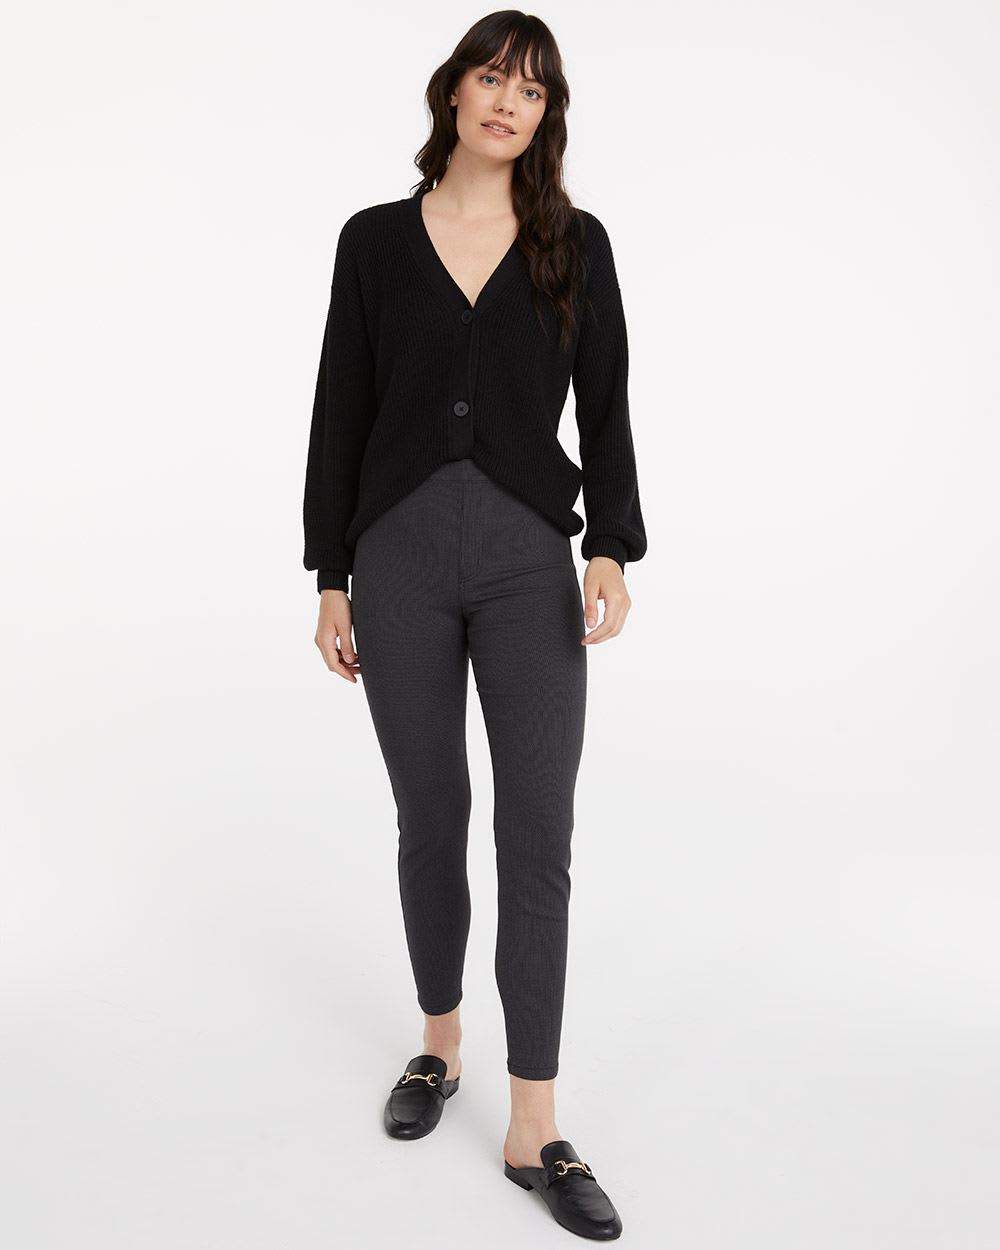 Textured Legging with Pockets, The Iconic - Petite, Petite